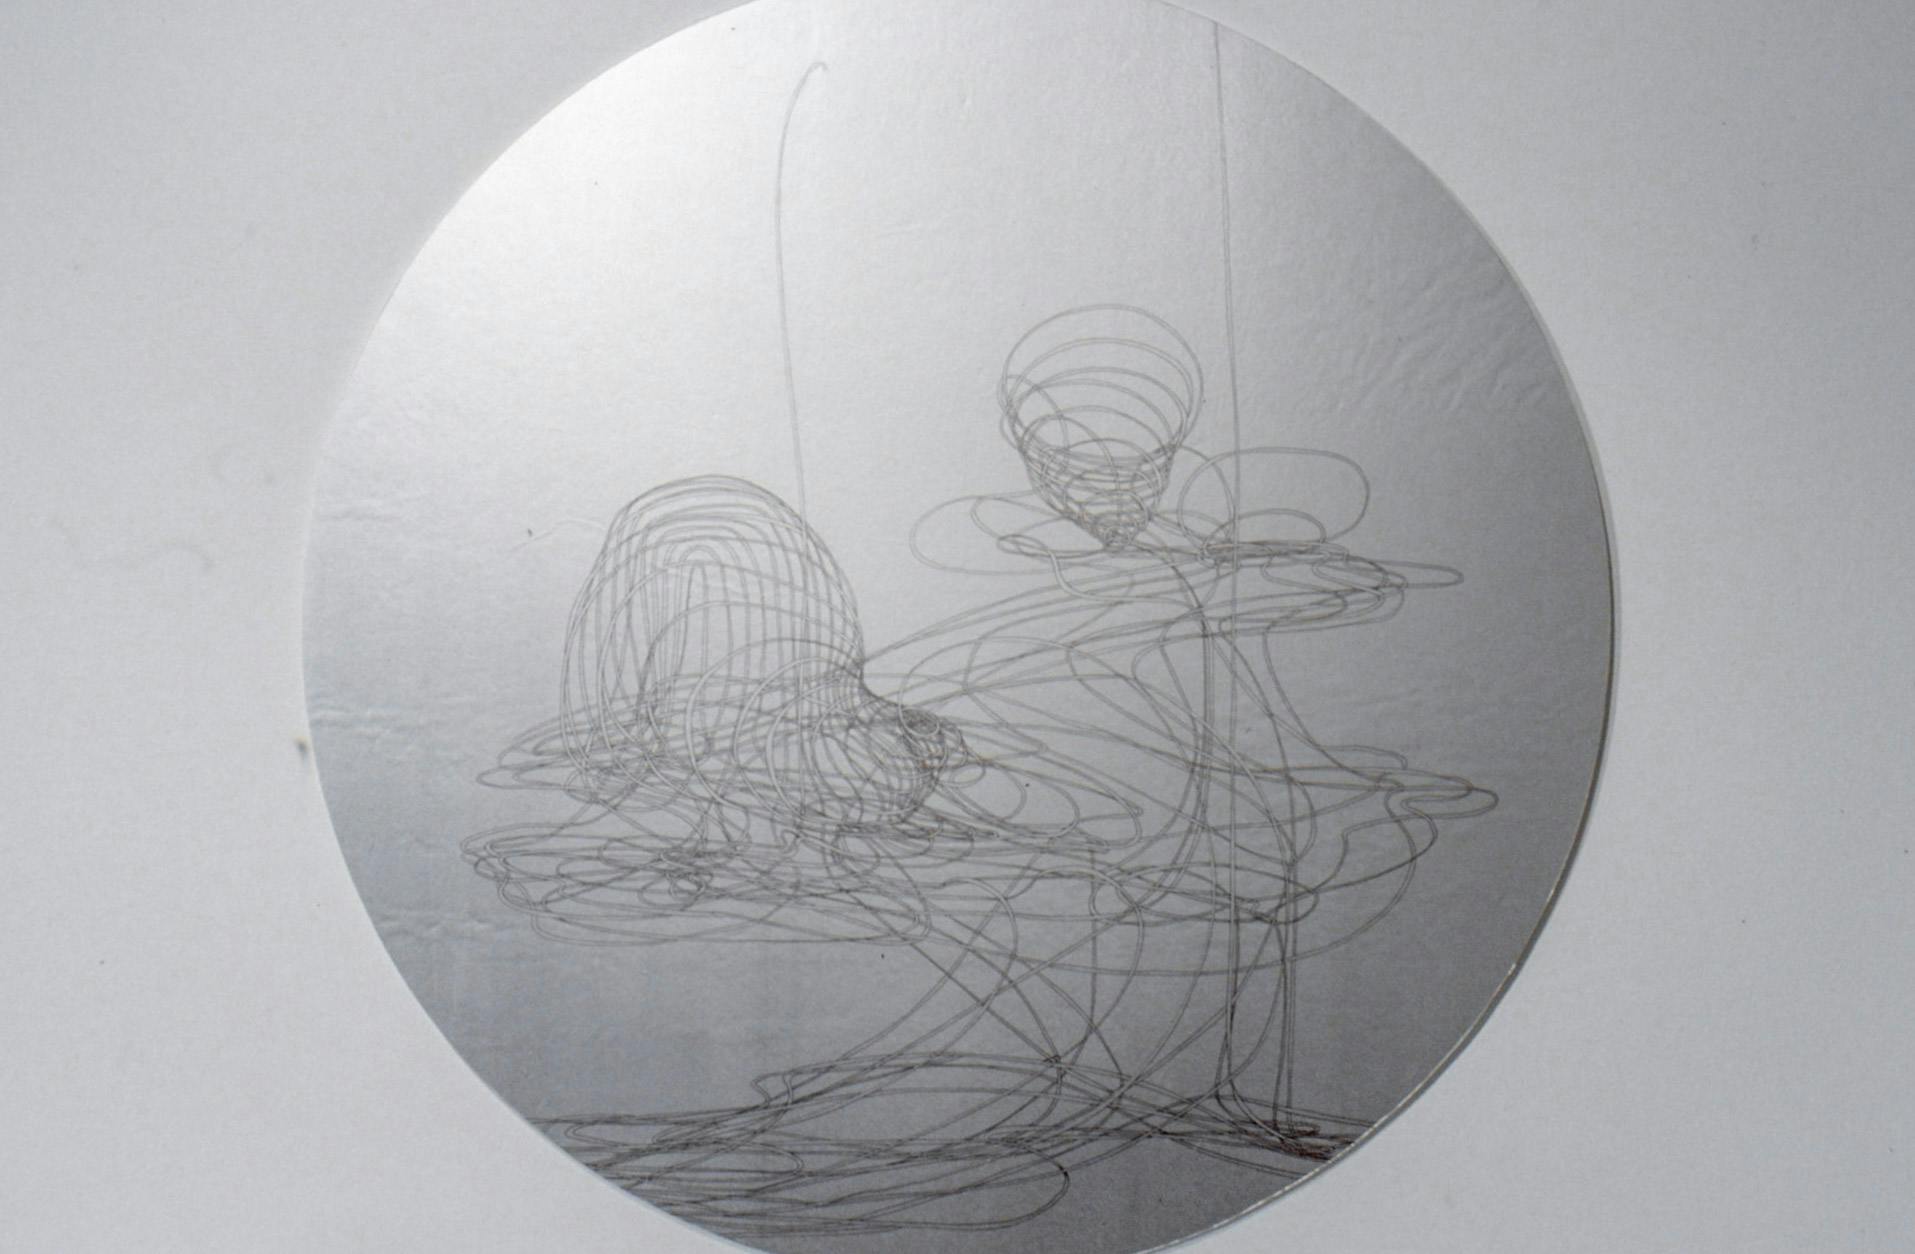 This is a close-up view of a circular shaped sculpture made by Lucy Pullen. On its silver metallic surface, an abstract line drawing is made. The drawing looks like two marionettes dancing together. 